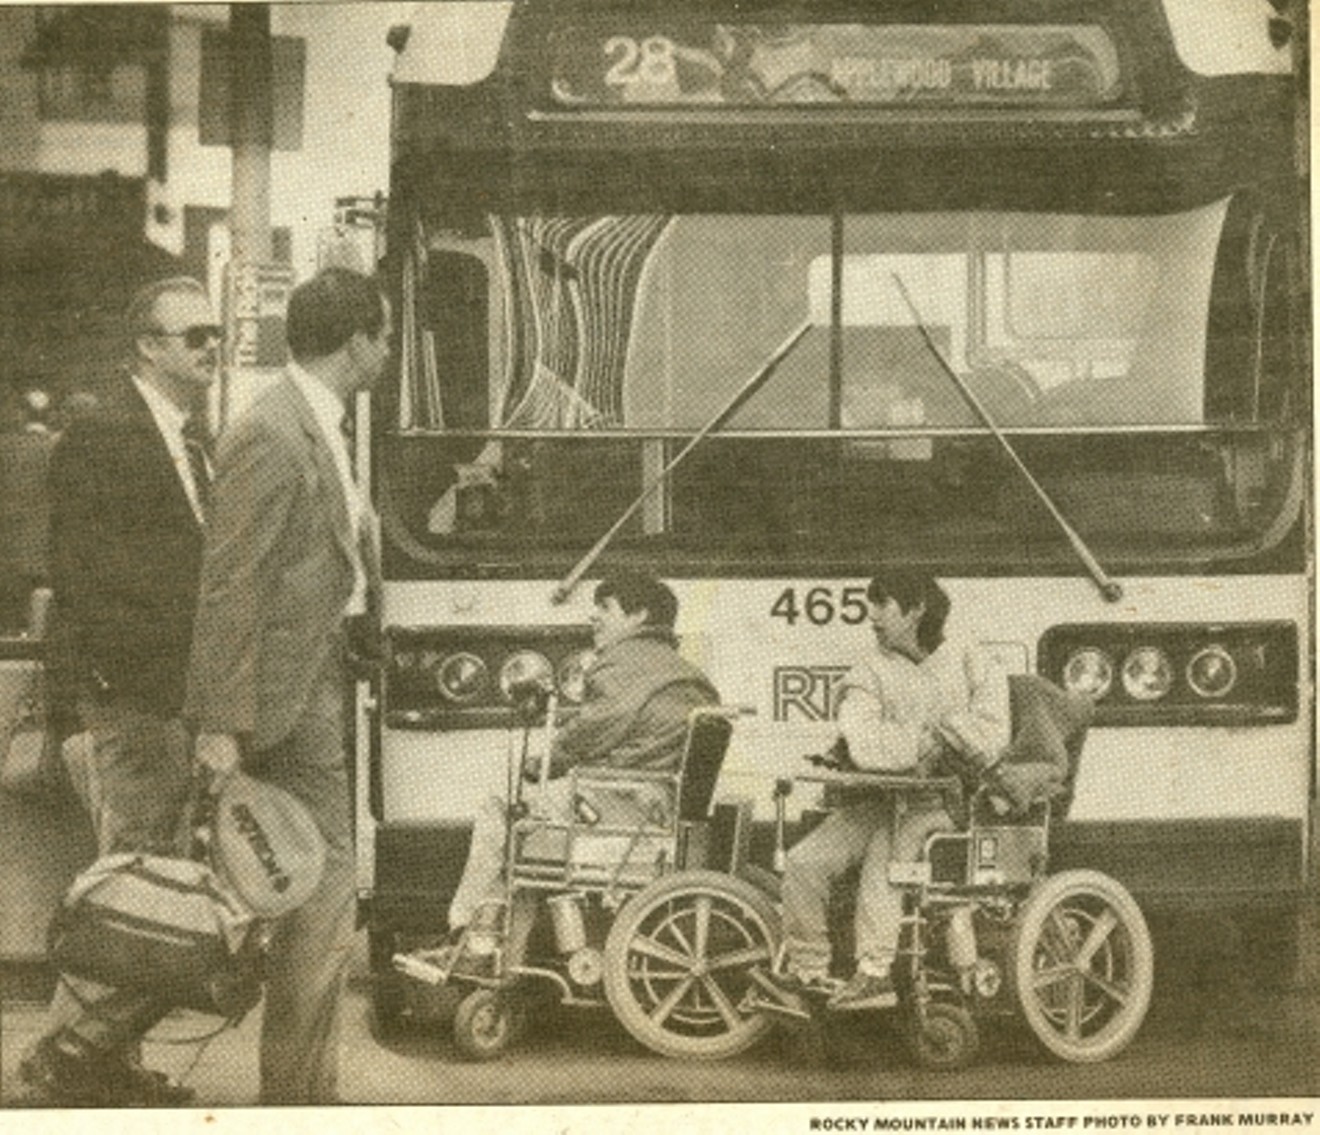 ADAPT members block a bus with their wheelchairs to protest RTD buses on February 15, 1985.